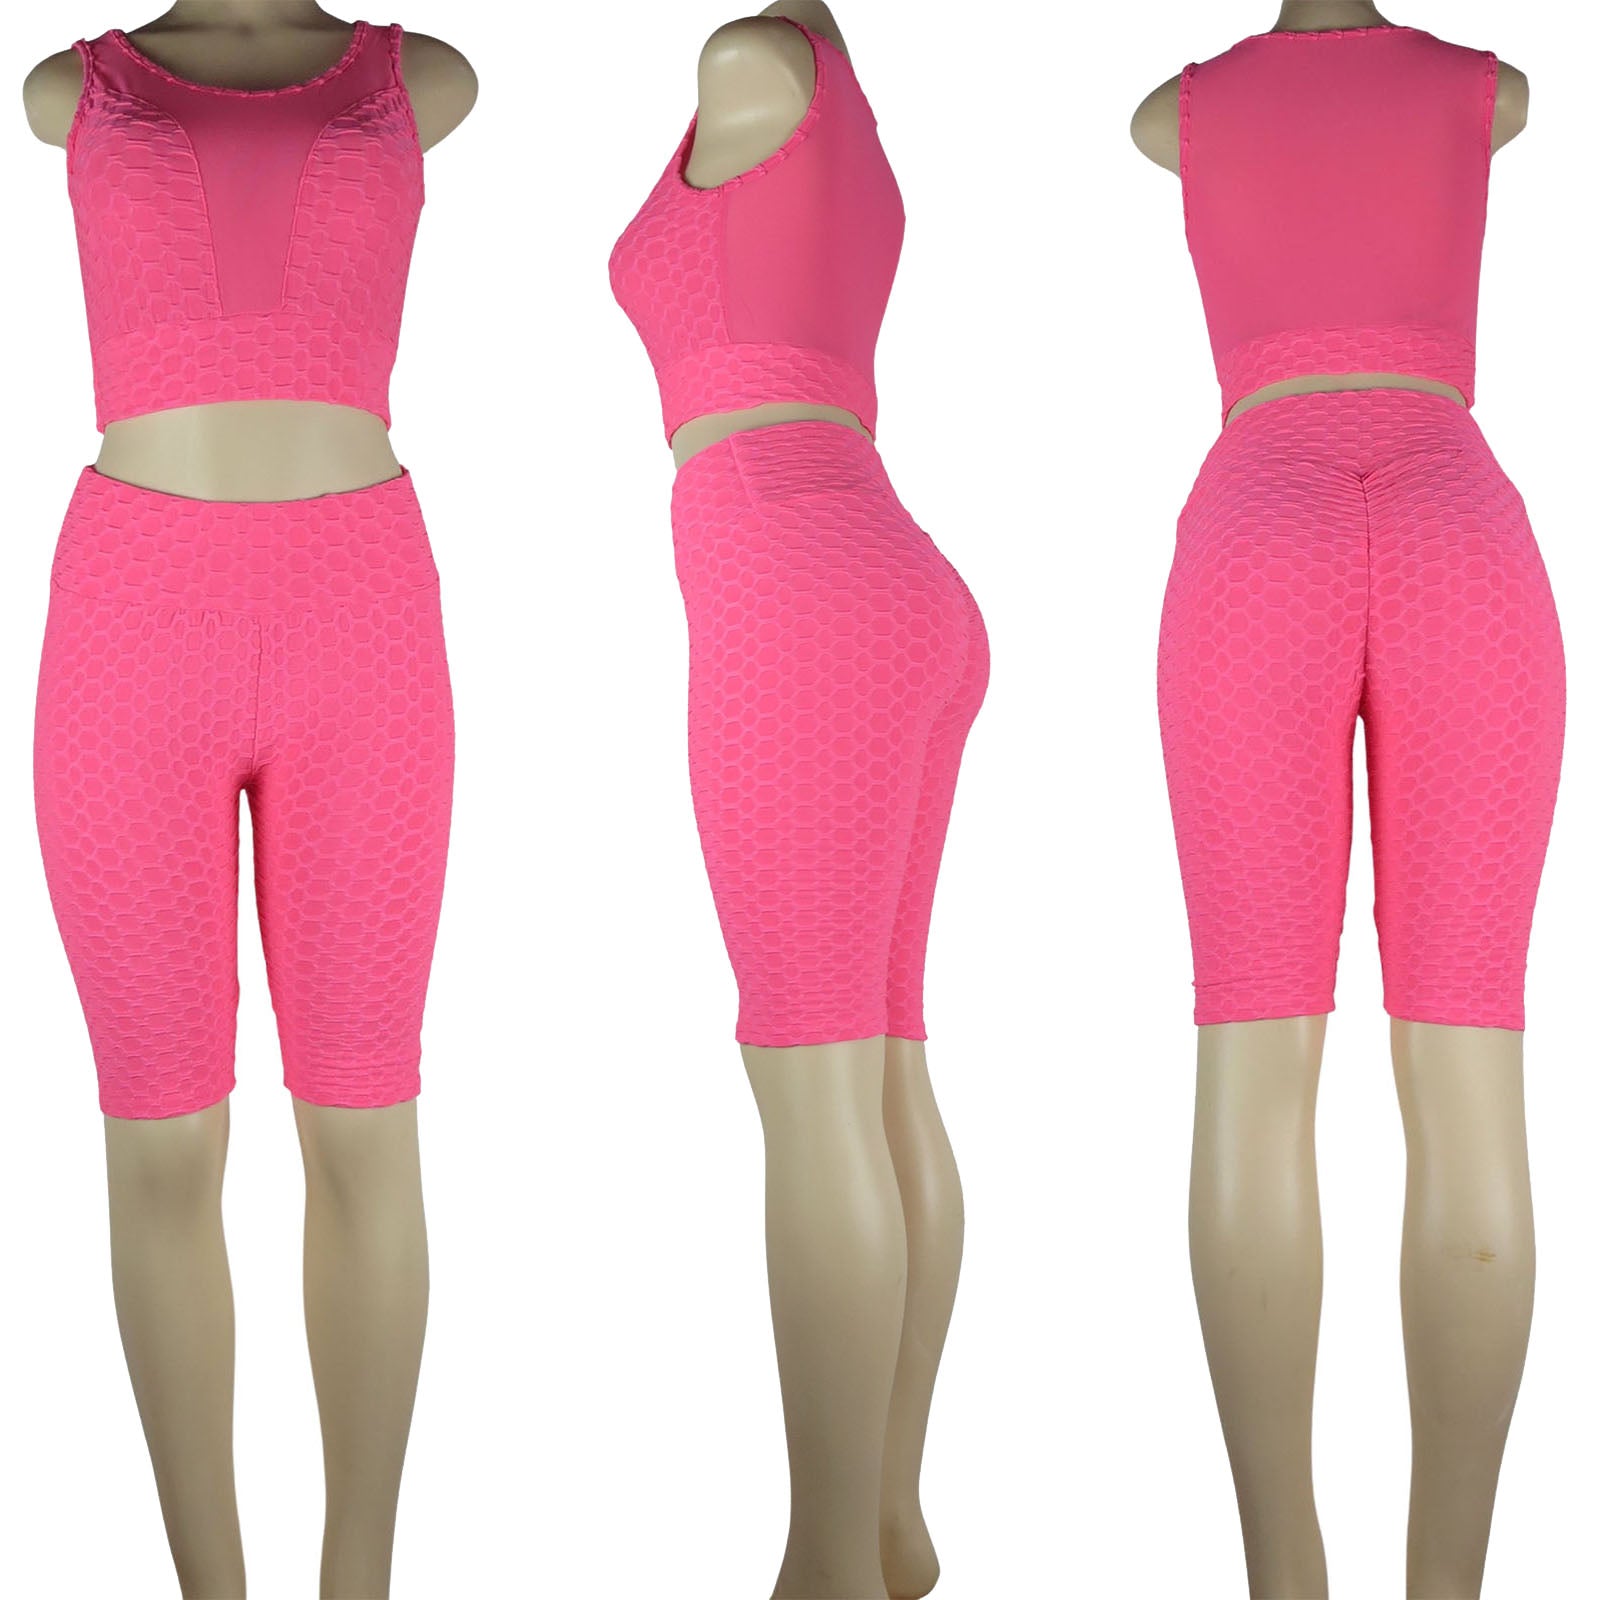 Wholesale TikTok bike shorts set with mesh and scrunch butt bubble design in pink